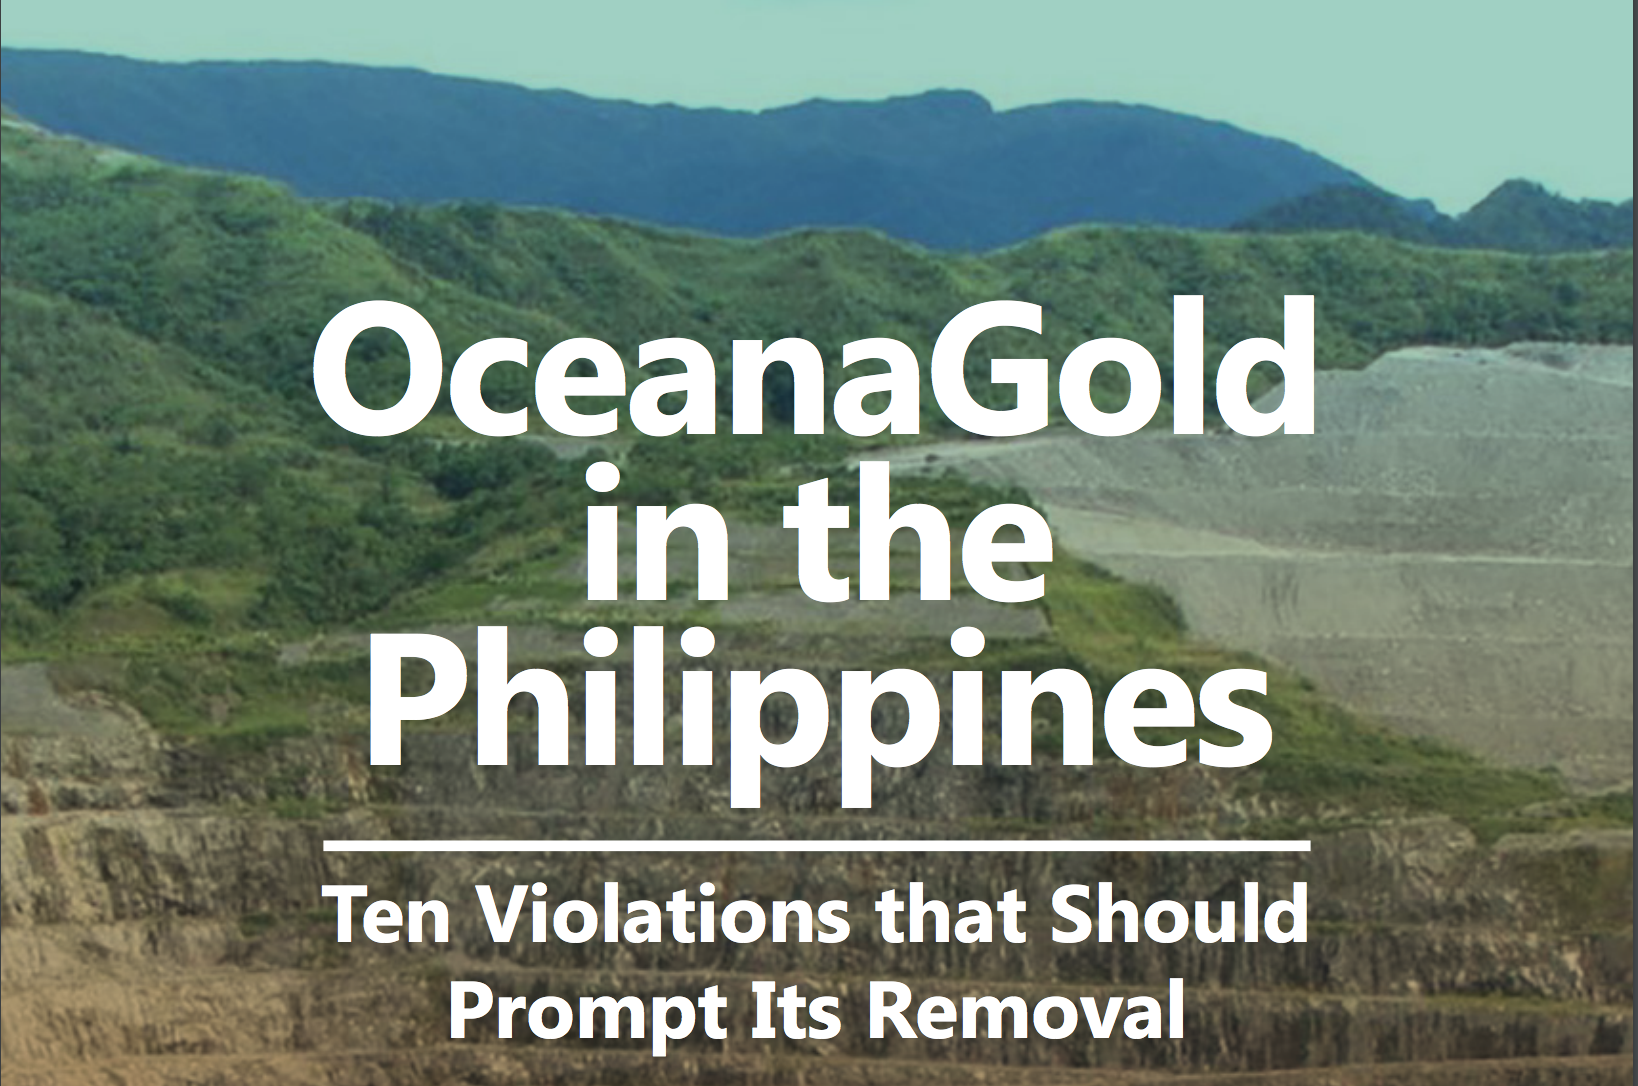 Report: OceanaGold in the Philippines